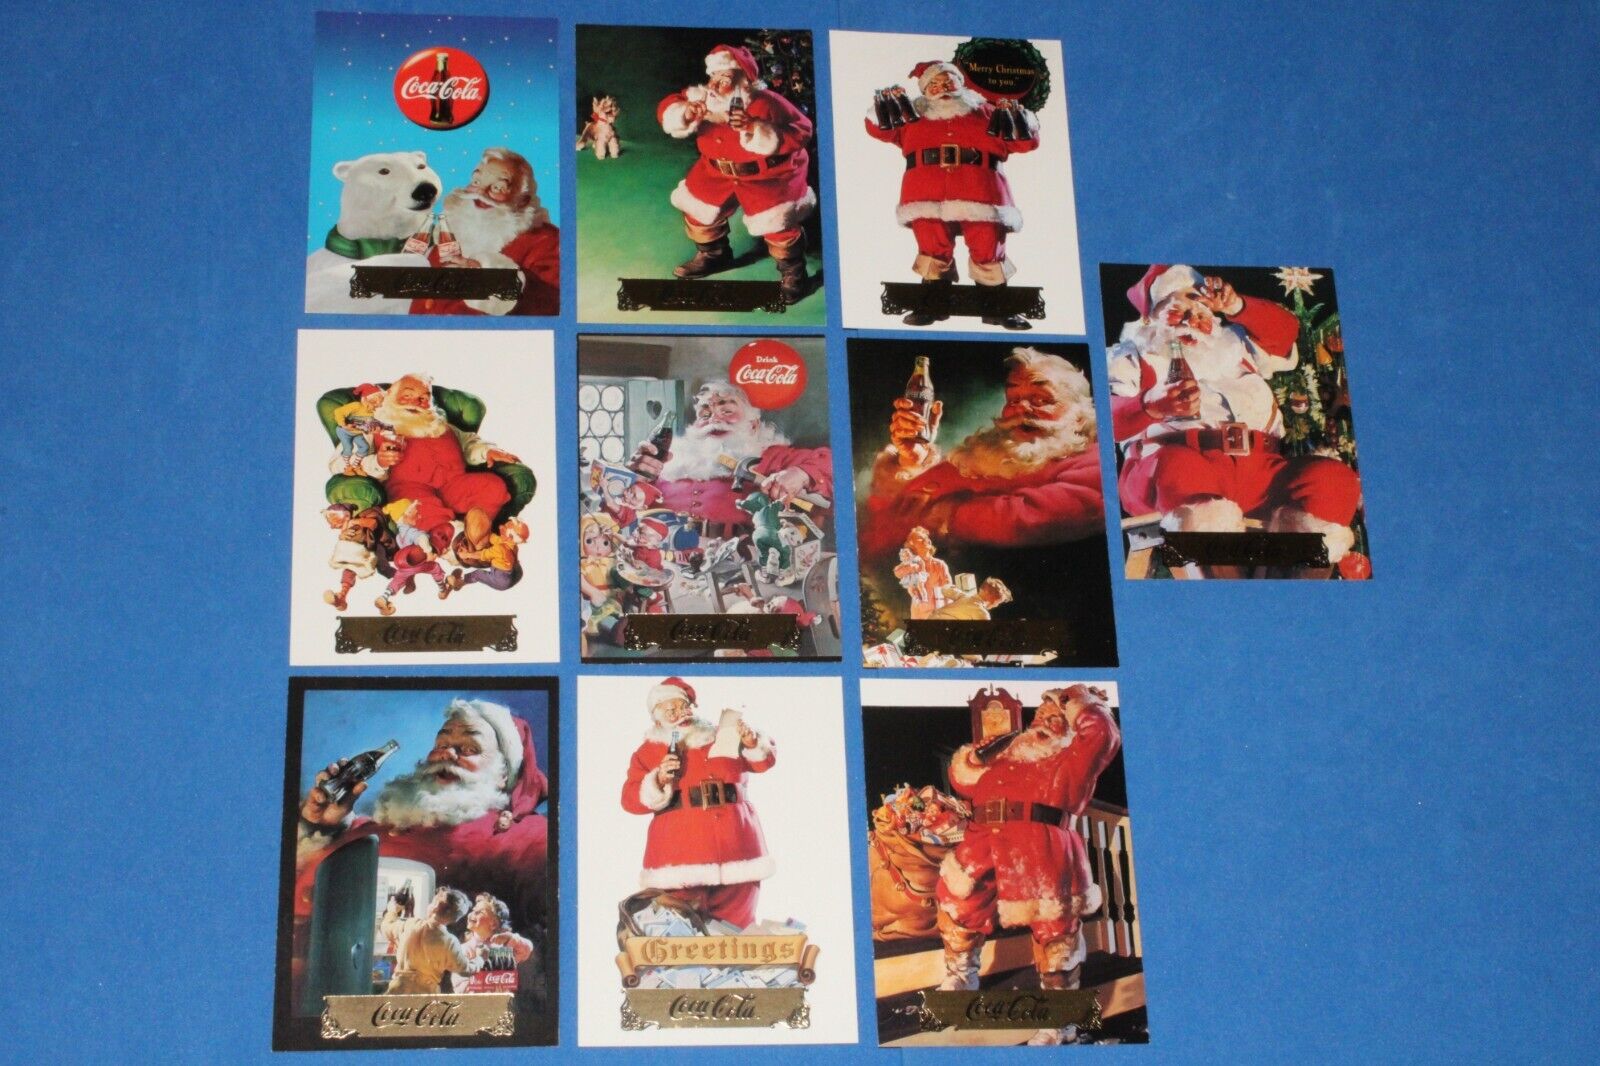 1994 COCA COLA SERIES 2 INSERT 10 CARD SET S11-S20 COLLECT-A-CARD SANTA SUBSET